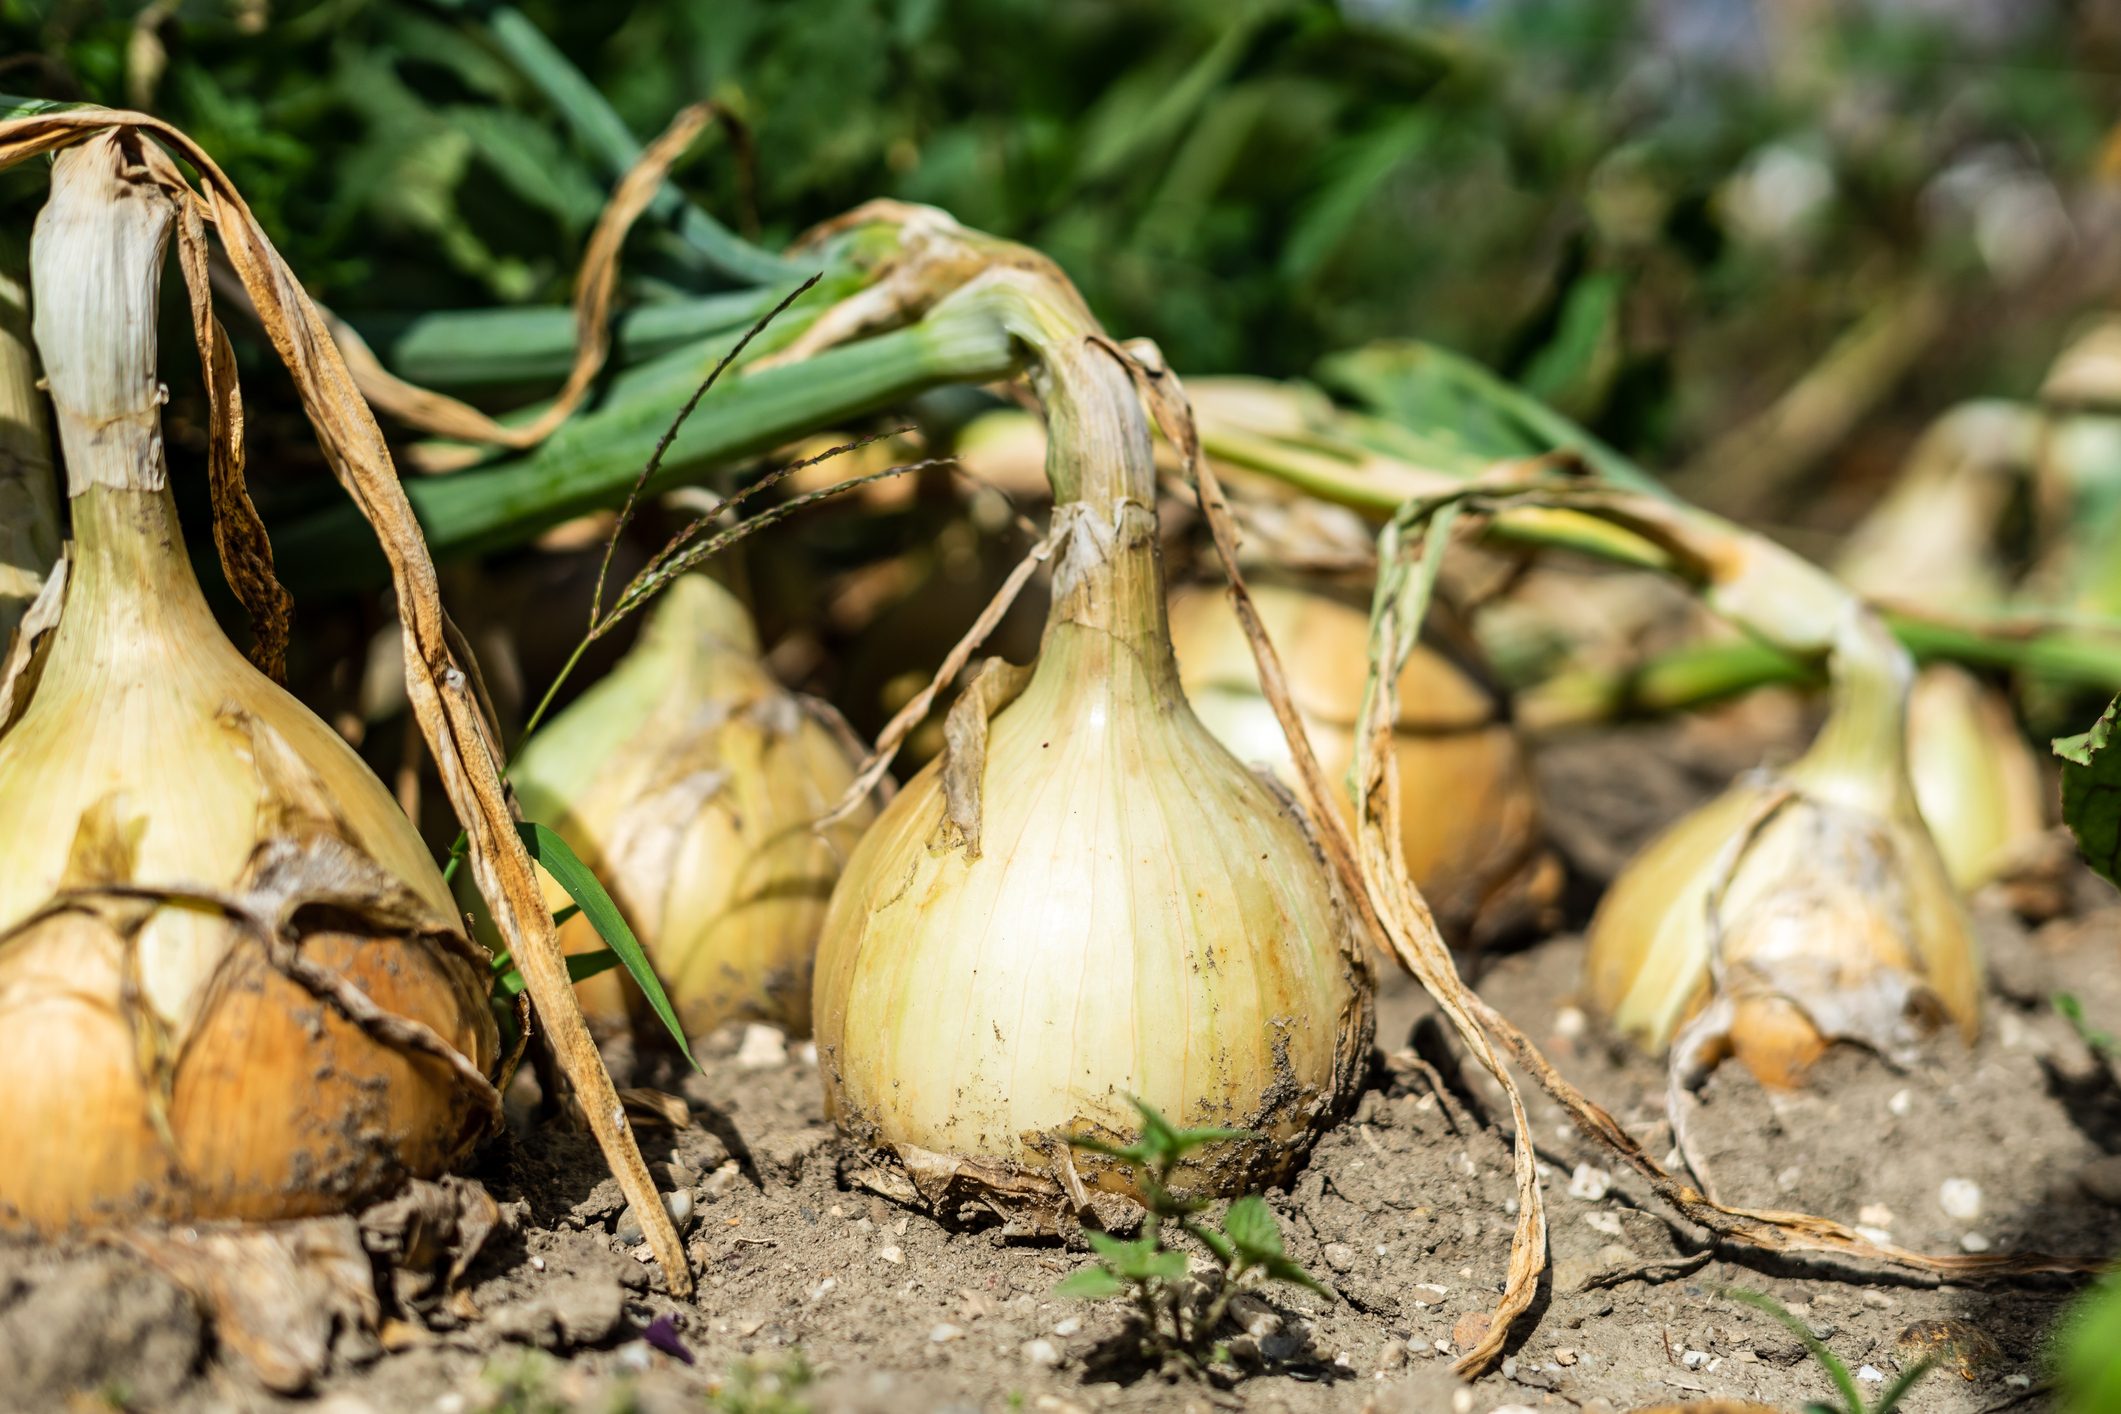 Raw onions in a vegetable garden